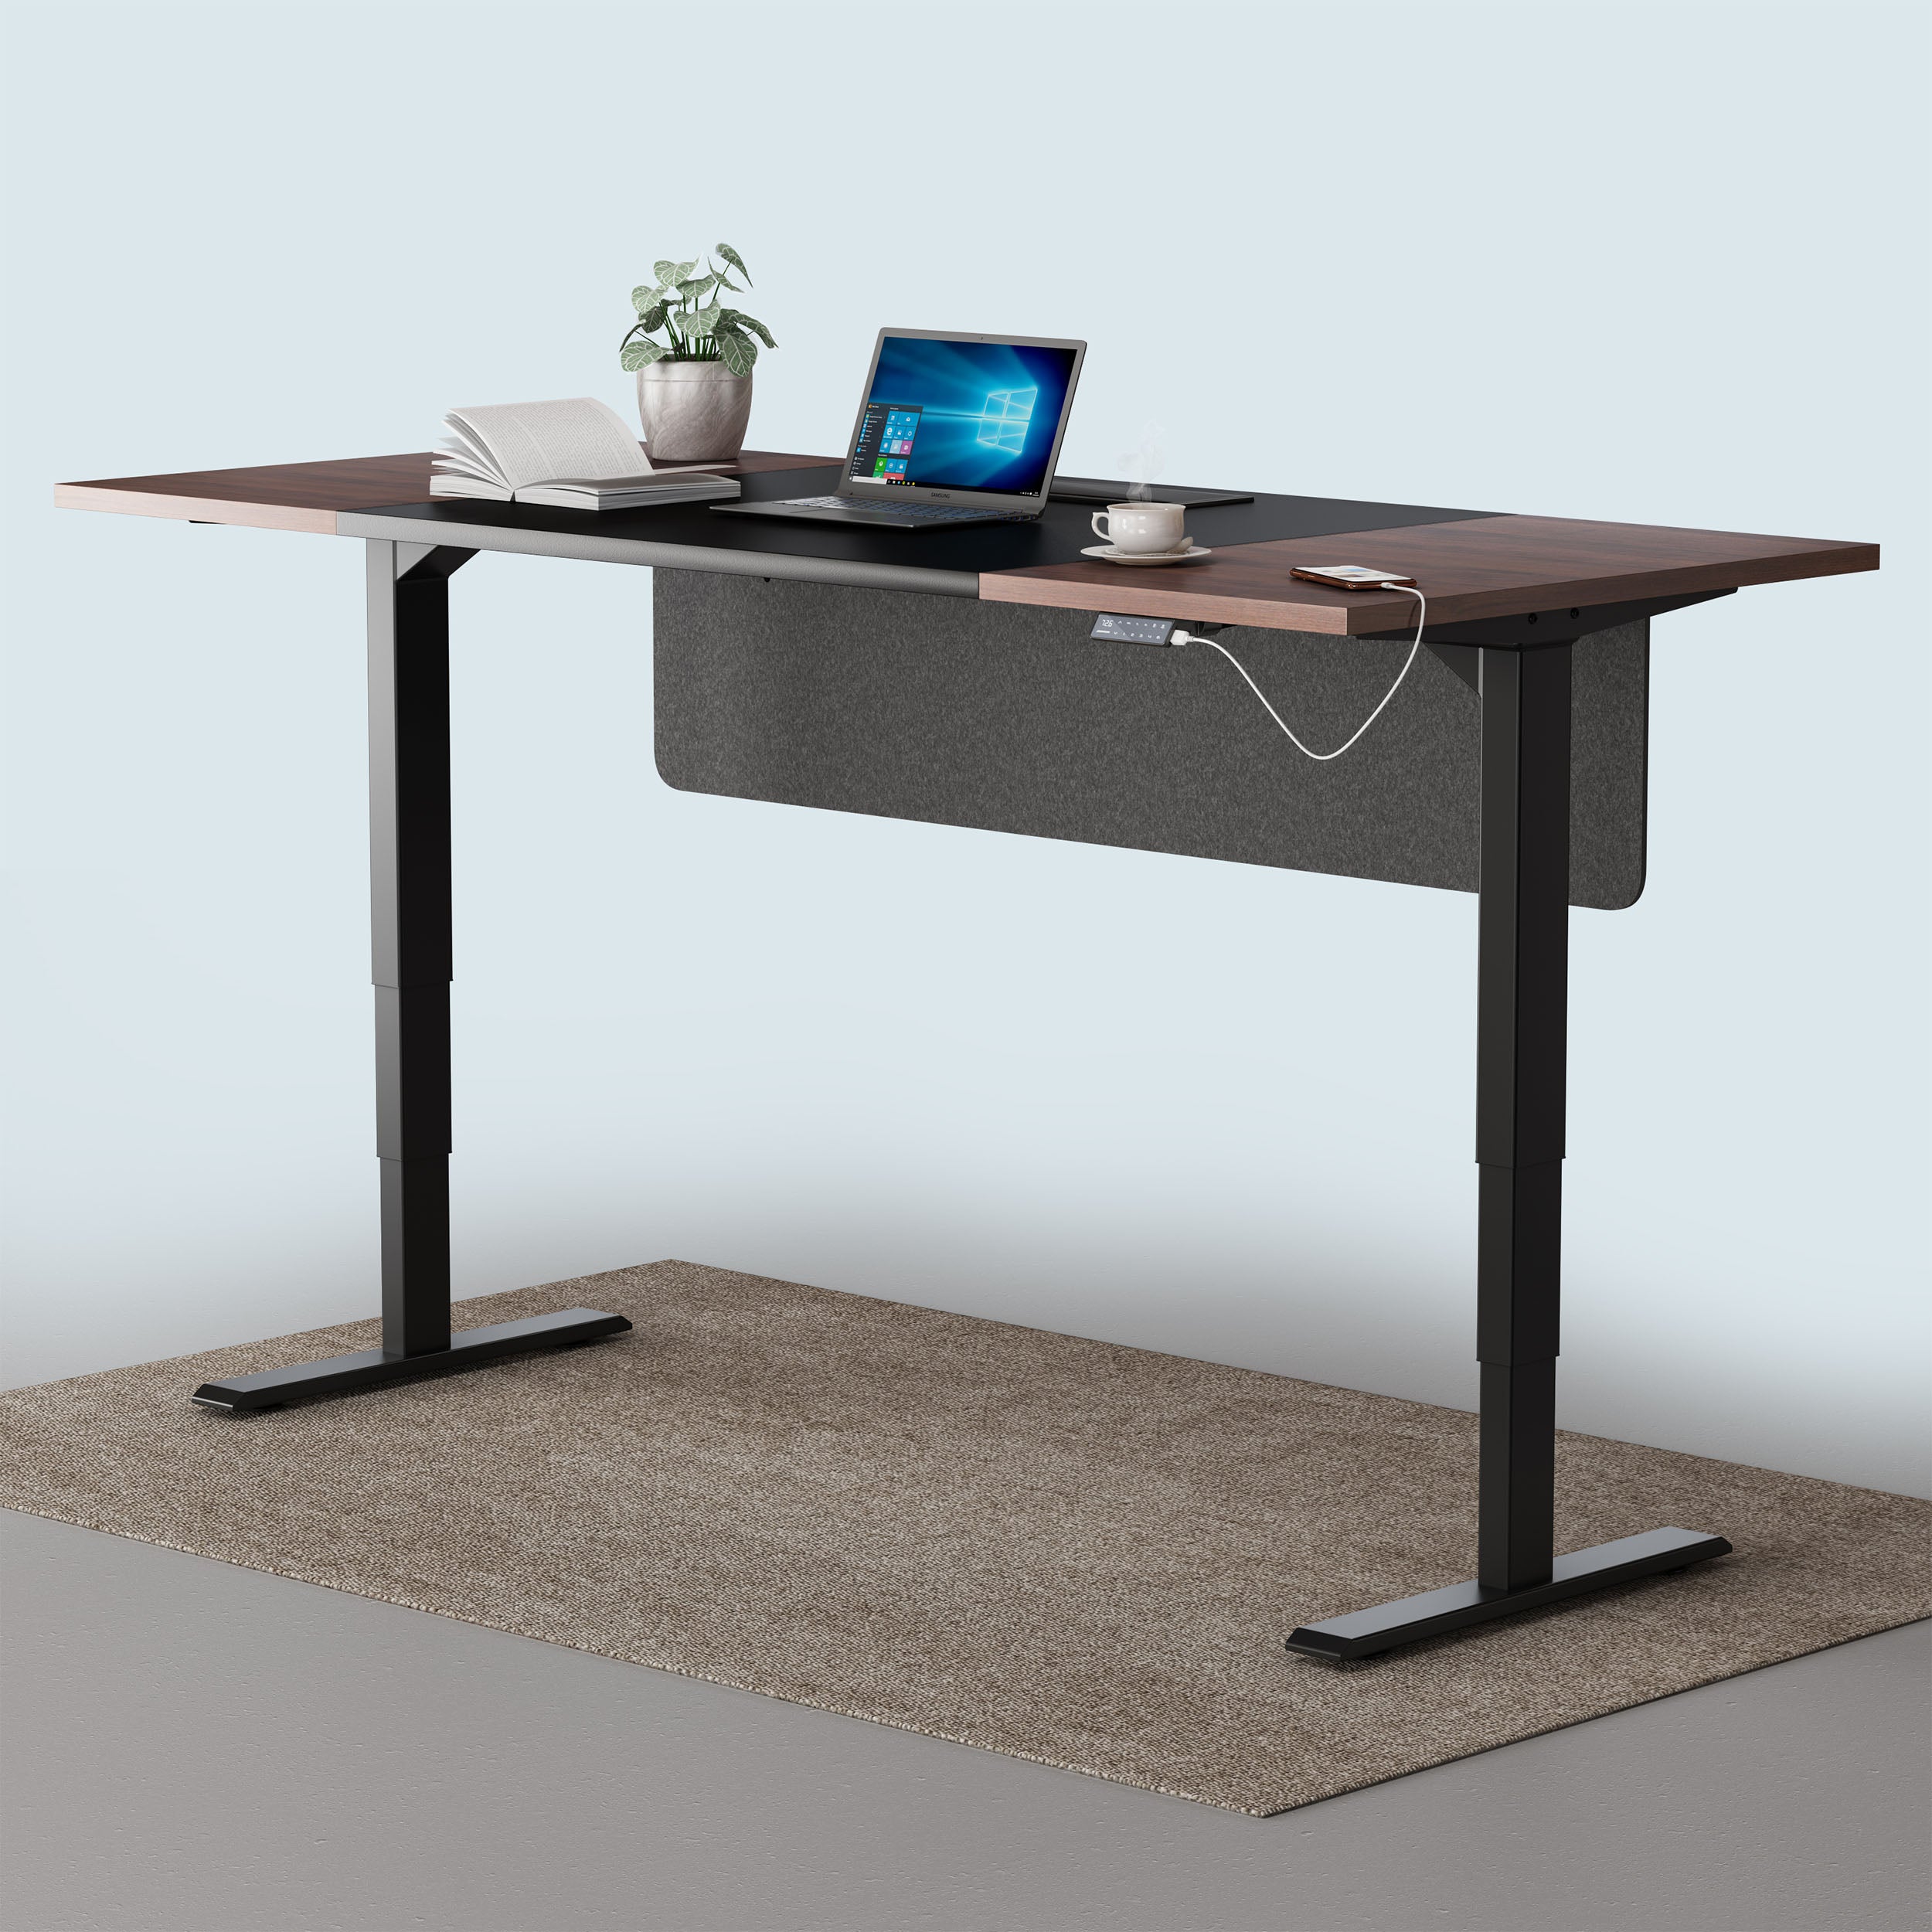 Maidesite black standing desk with 160cm tabletop for perfect sitting